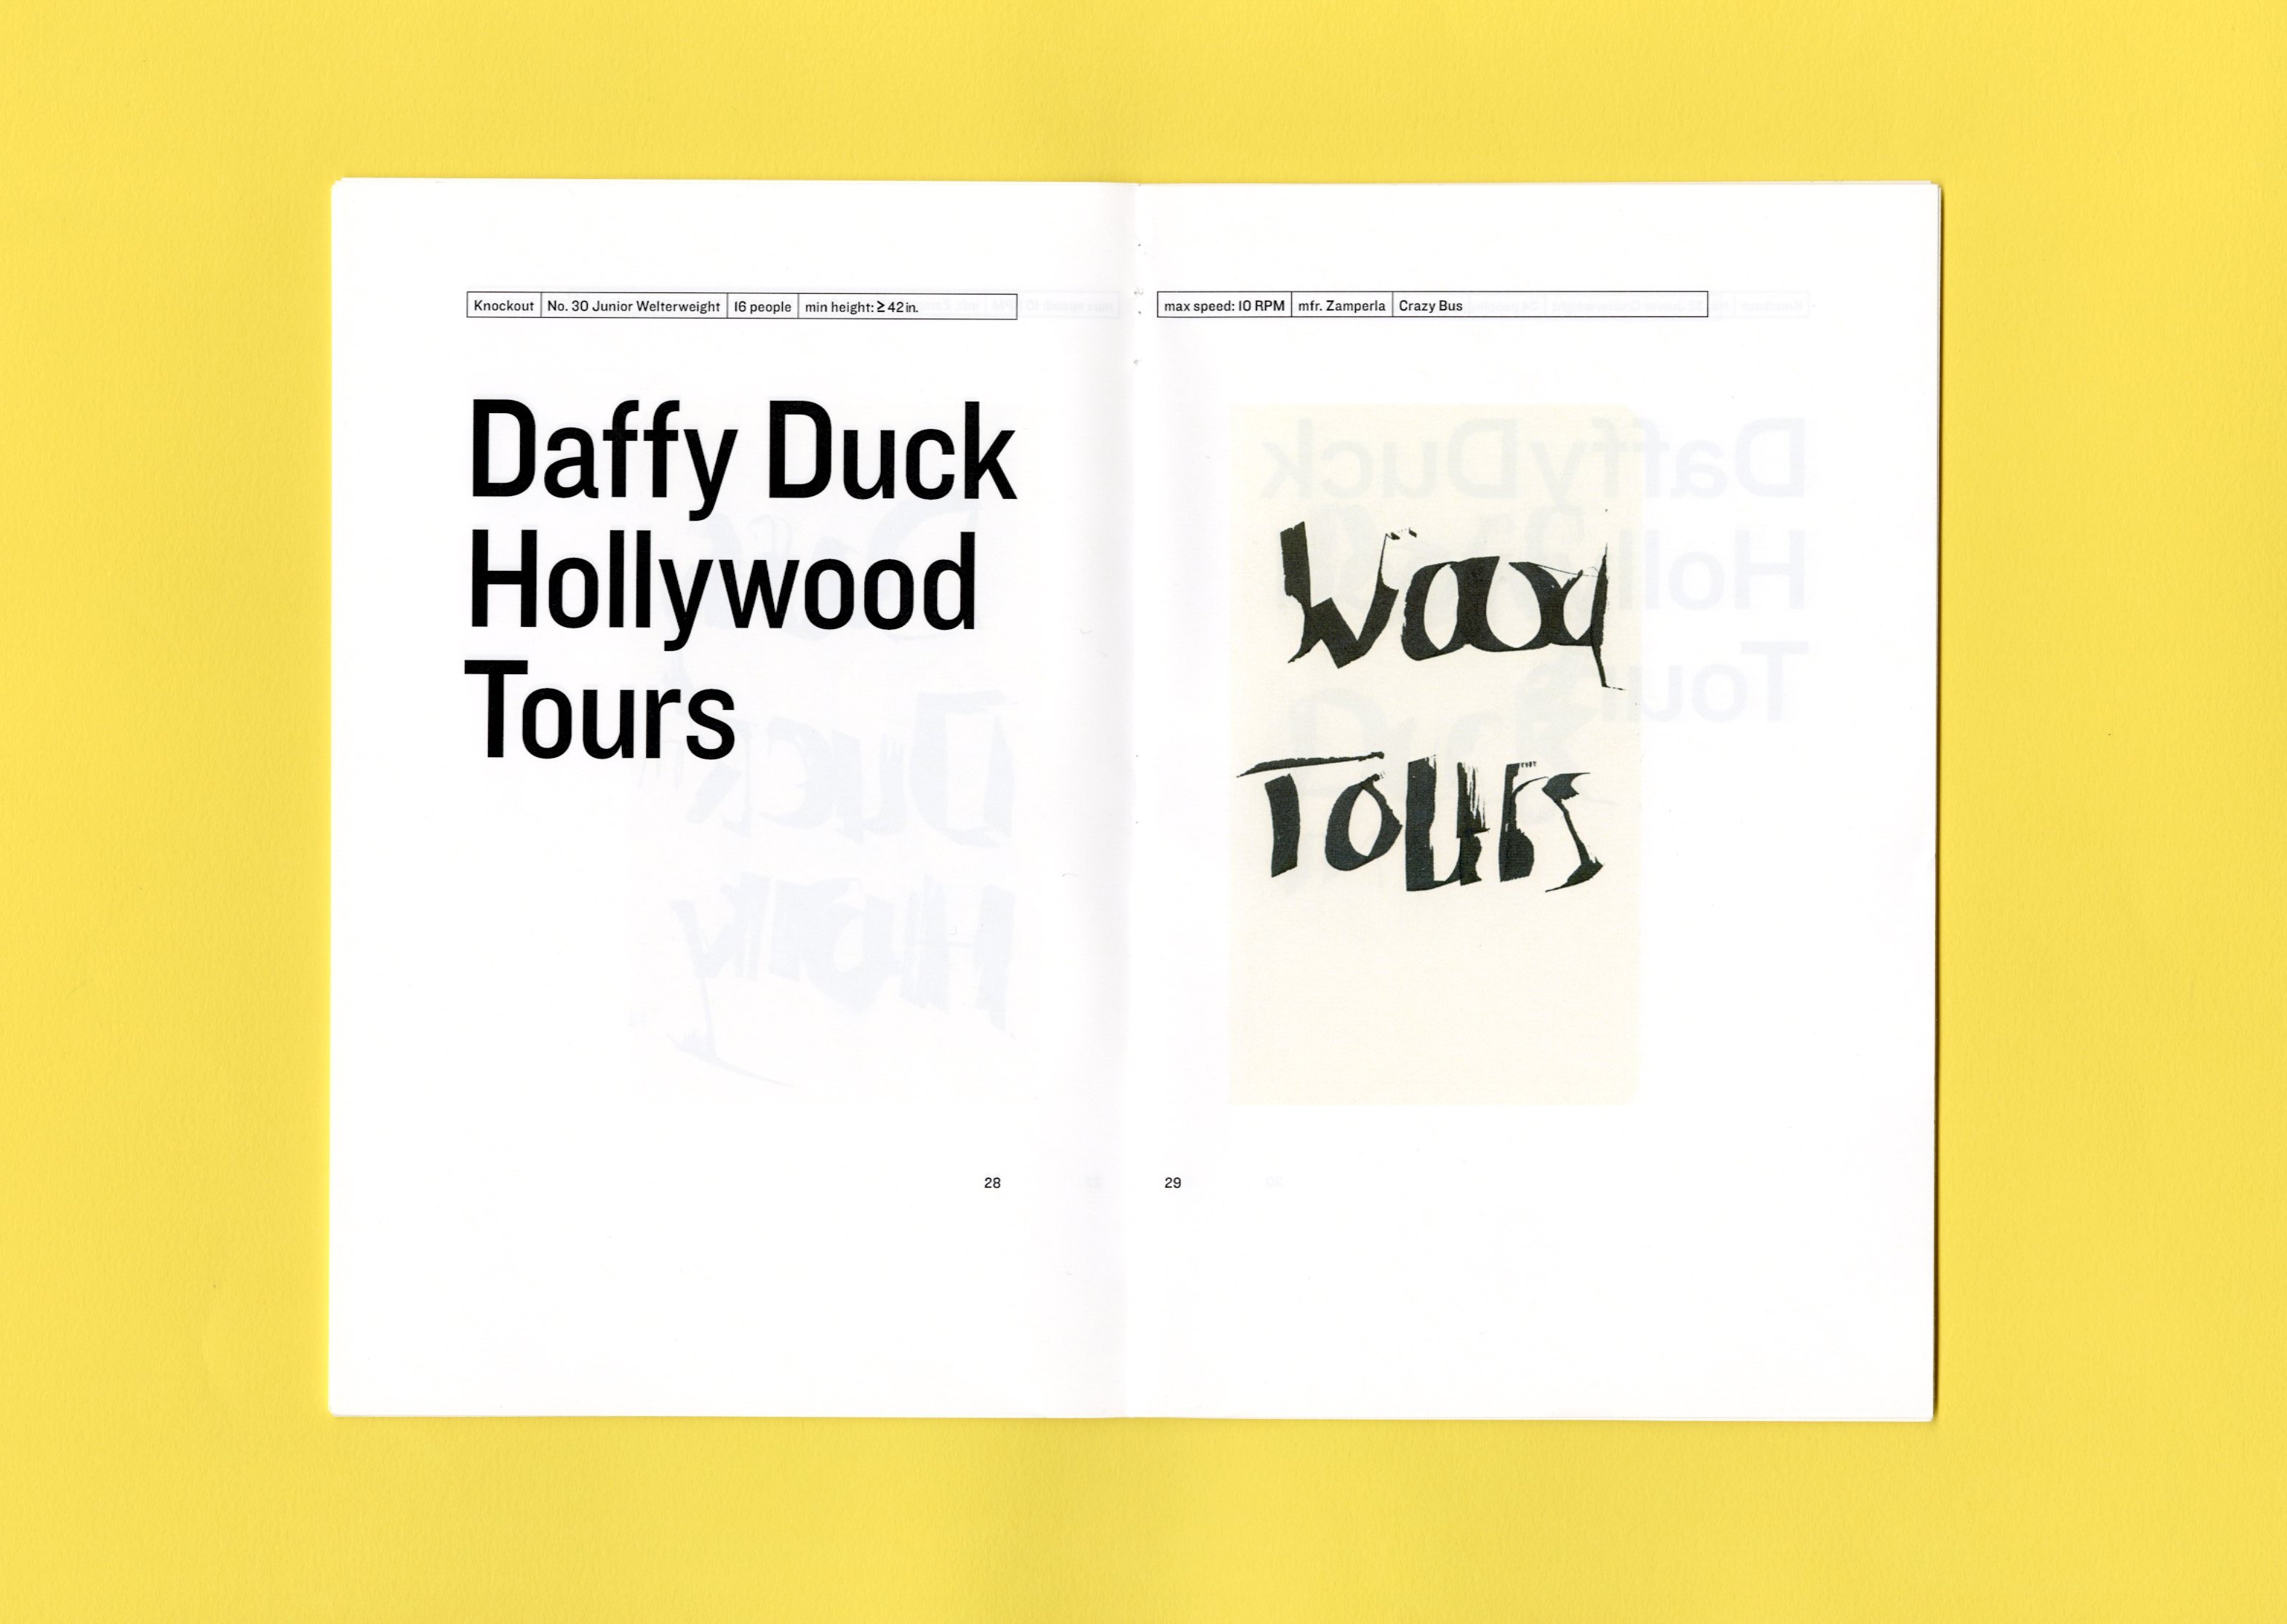 Daffy Duck Hollywood Tours